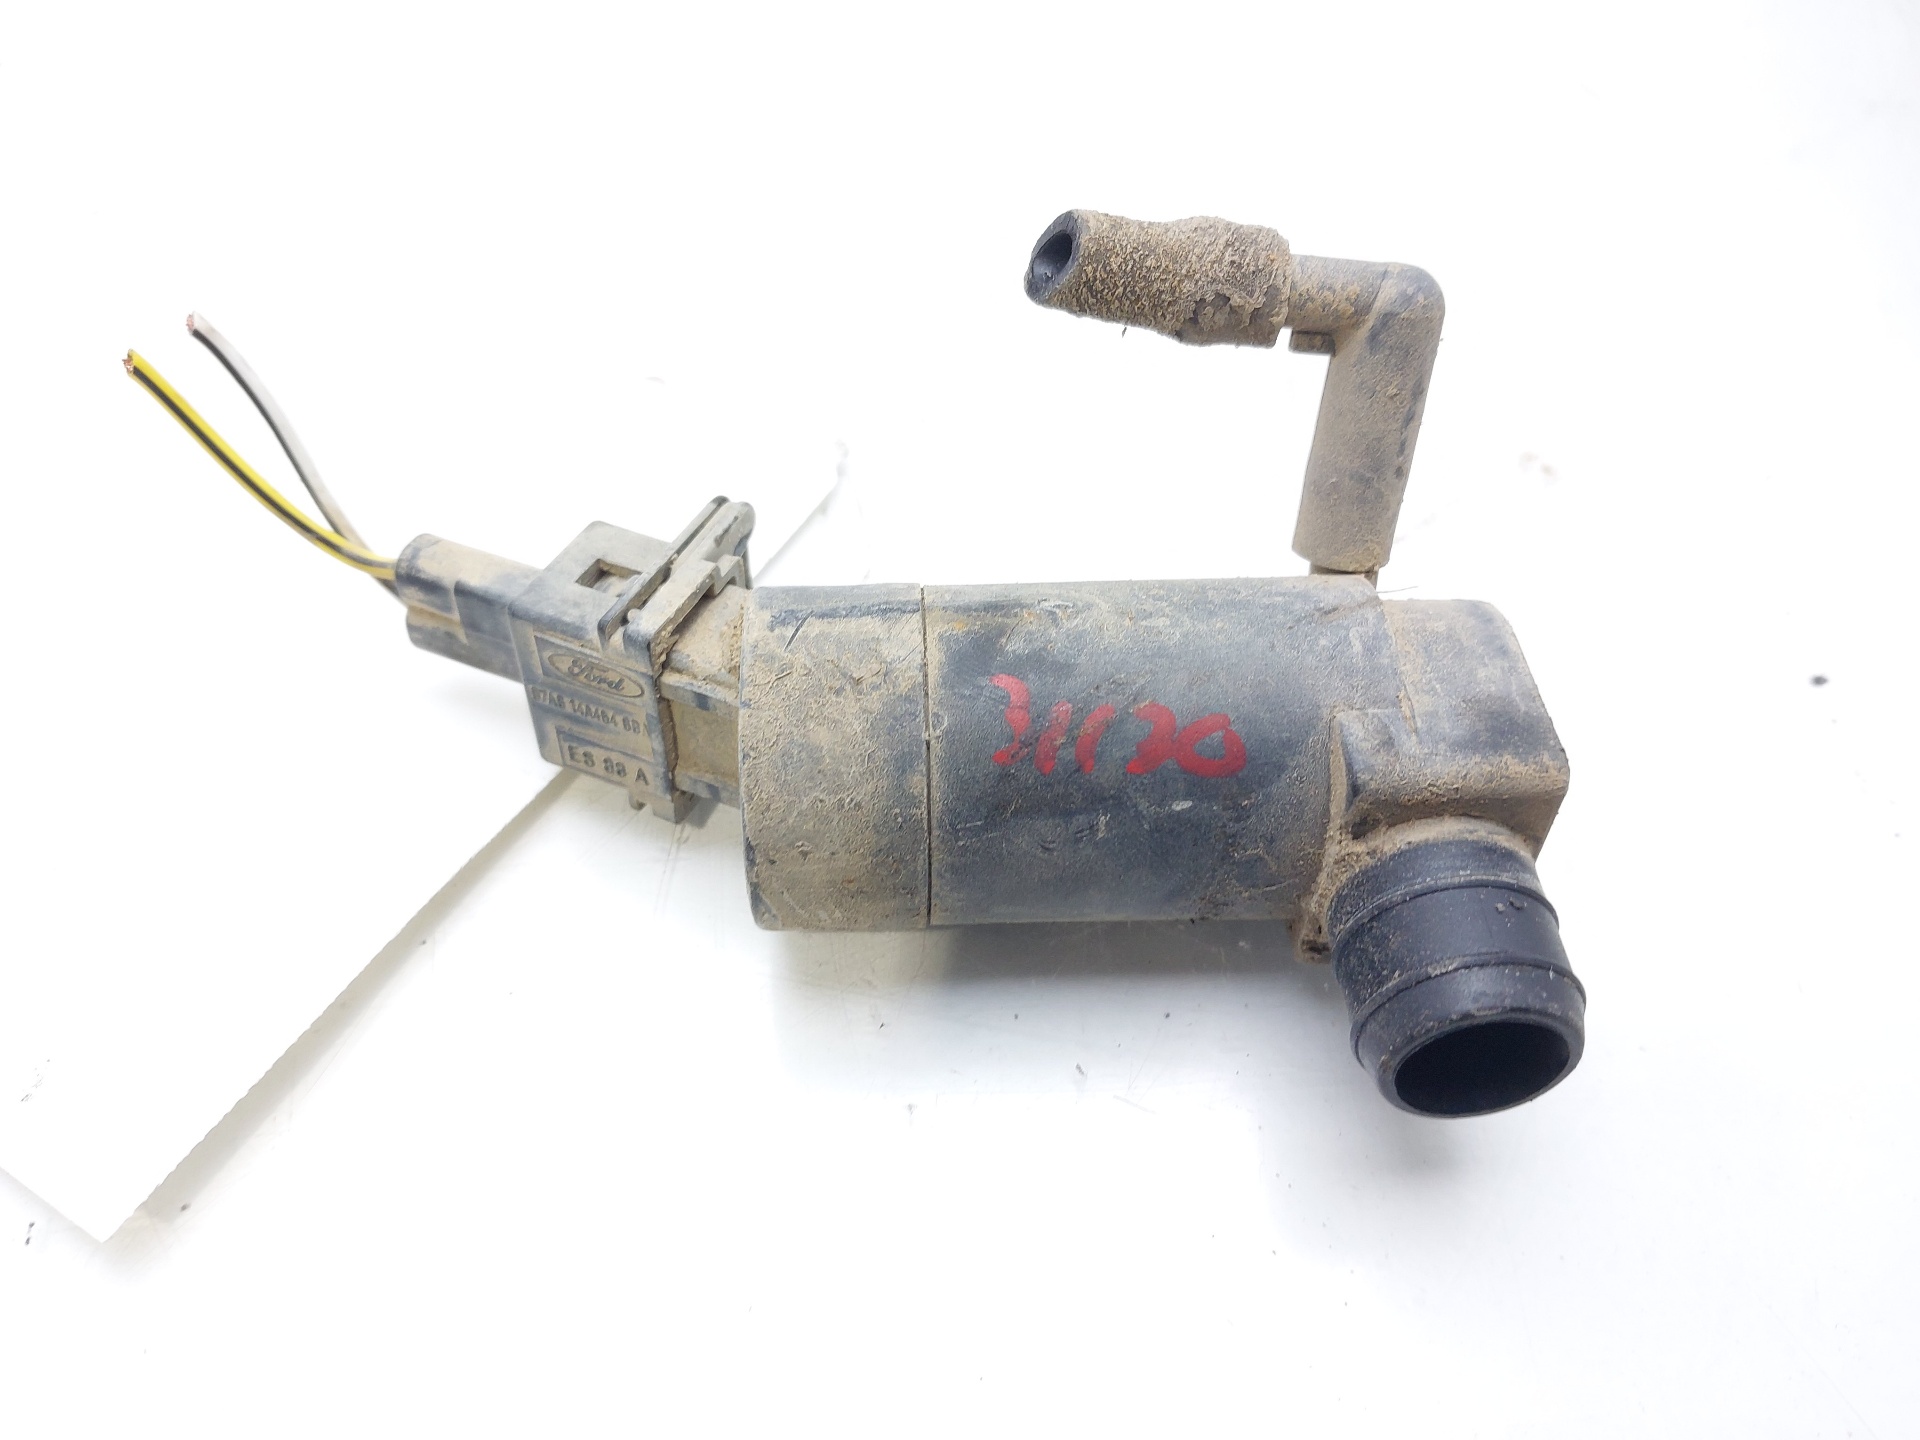 FORD Mondeo 3 generation (2000-2007) Washer Tank Motor 1S7117K624DB 23021324